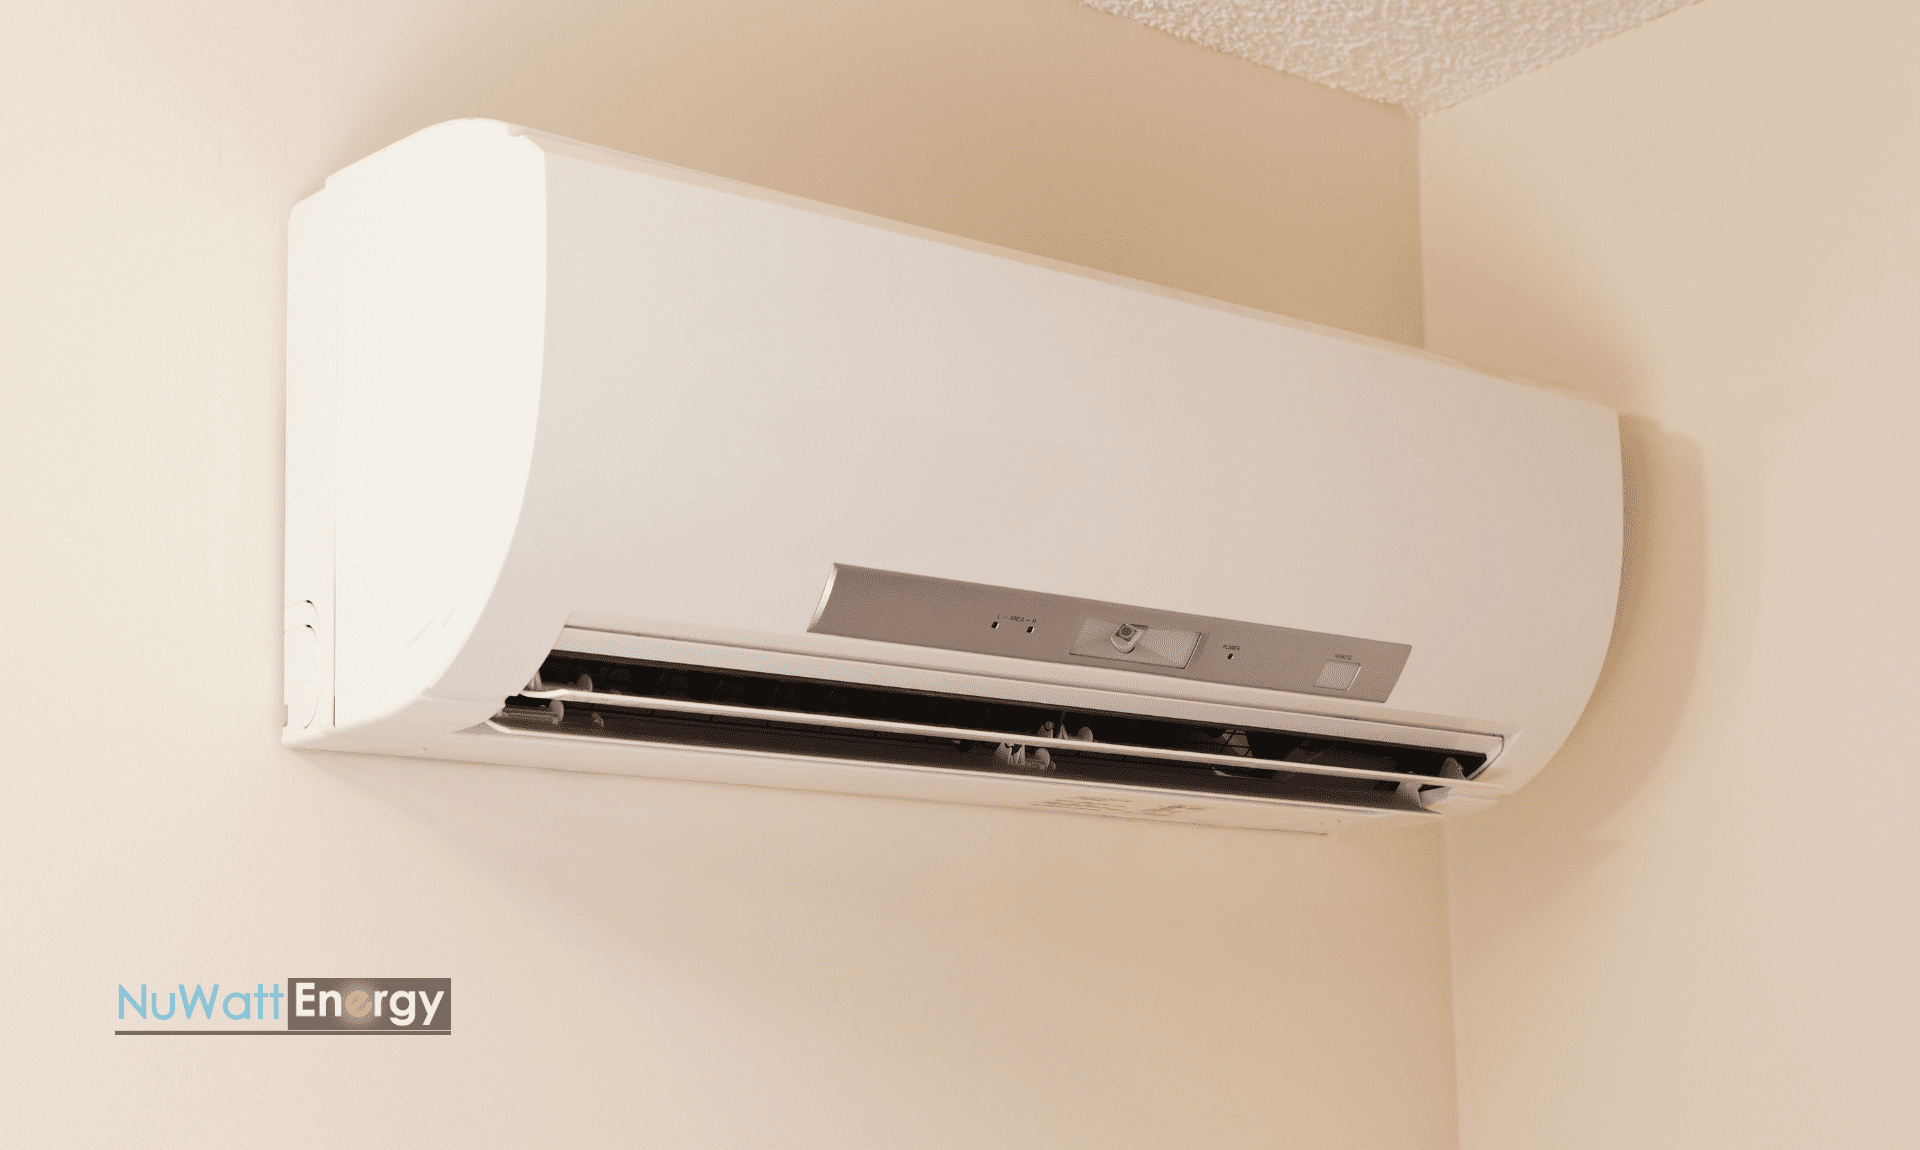 Mini-Split Heat Pump Heating and Air Conditioning Unit / via Getty Images